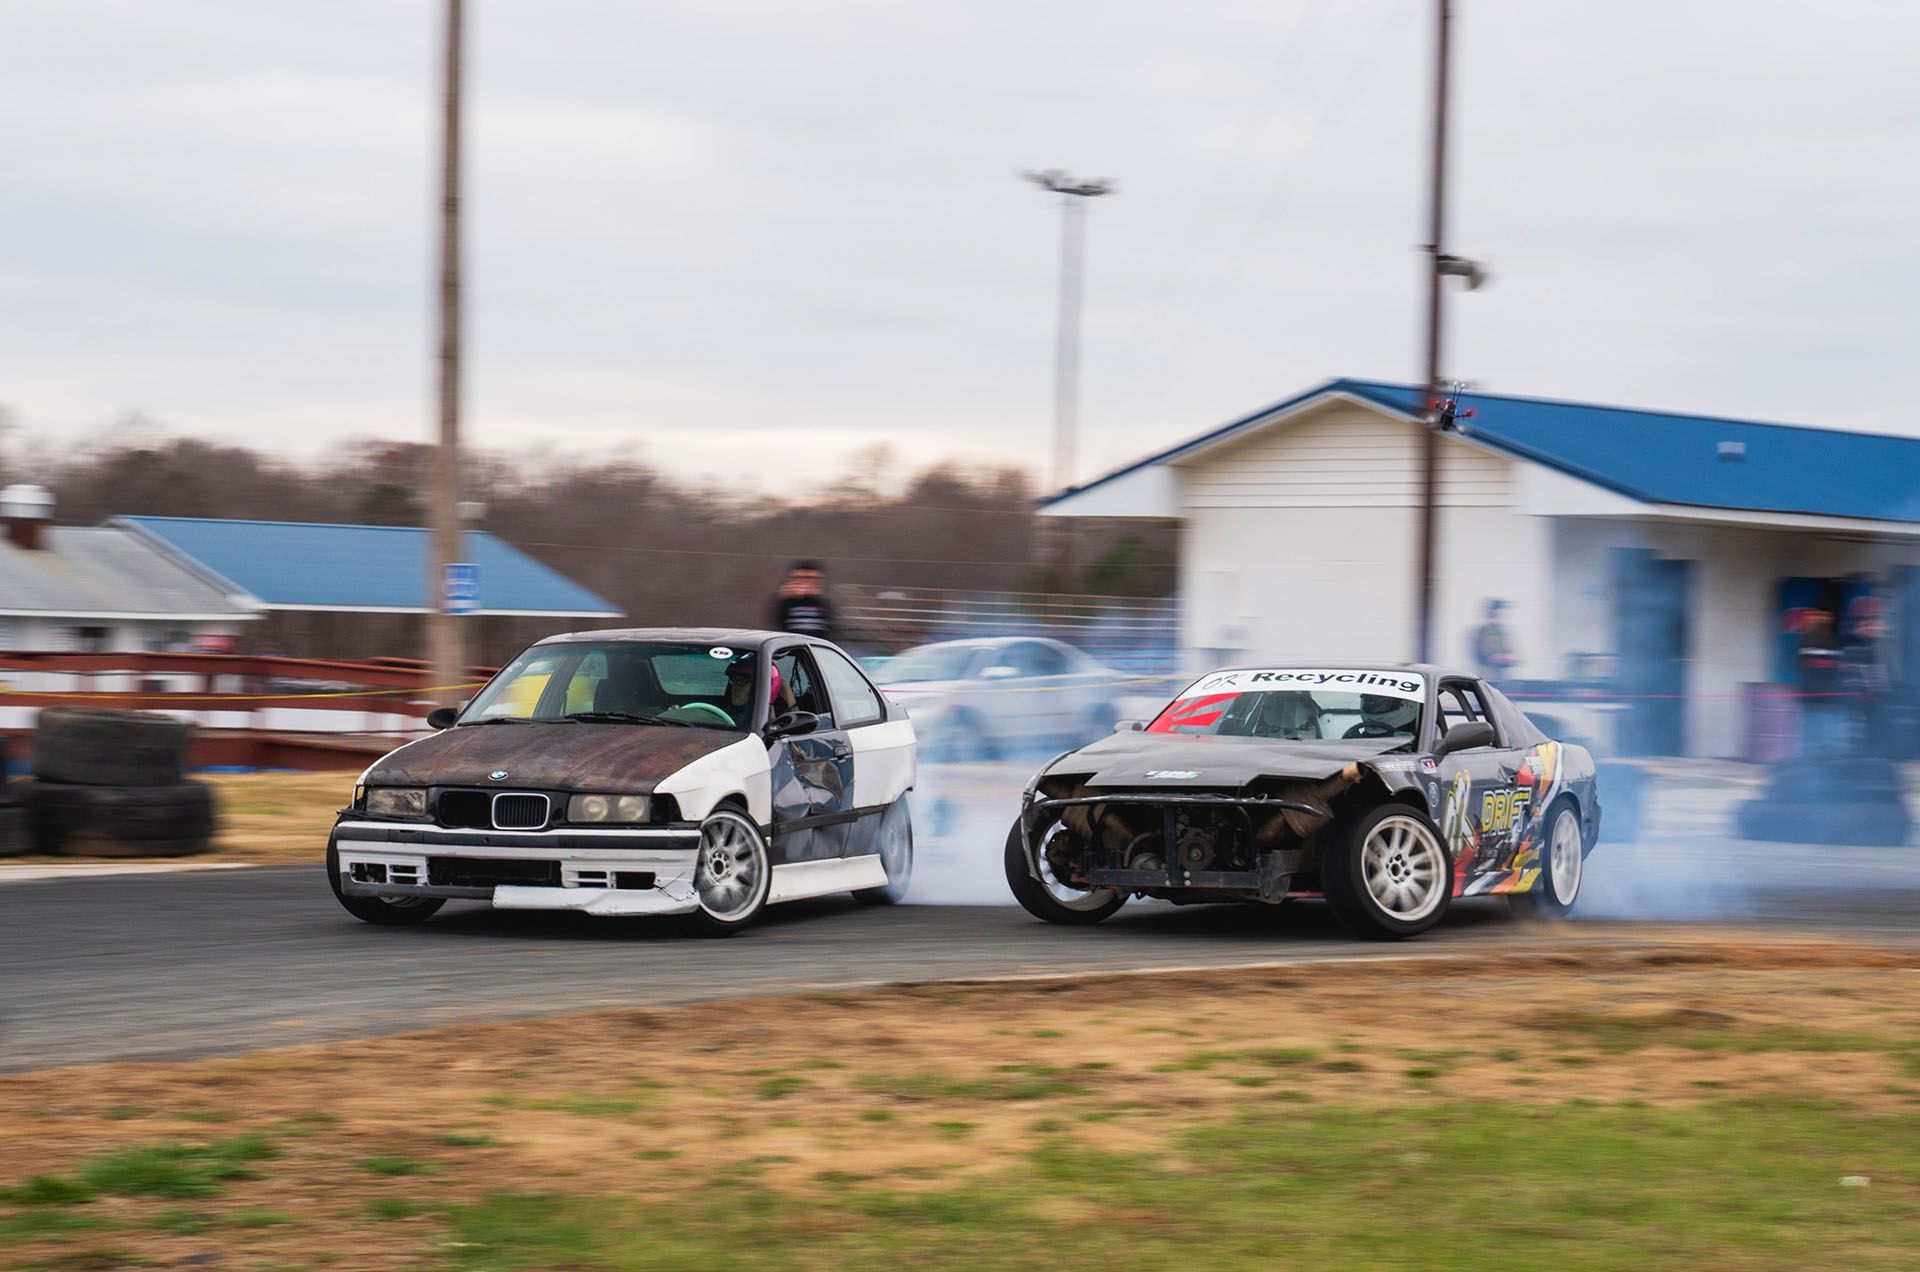 Our first 2-day event of 2024! Night drifting on Saturday, April 27th, and open practice on Sunday, April 28th. We will be camping on Saturday night 🤙🏻
Camping is free with any 2-day pass.
Grilling and fires are allowed if you bring your own grill or fire pit (no open fires allowed).
TICKETS ARE SOLD AT THE GATE THE DAY OF THE EVENT (CASH, CARD, APPLE PAY):
Spectators (no rides): $25 for one day, $50 for both.
Spectators with rides: $30 for one day, $60 for both.
Drivers: $65 for one day, $130 for both.
Saturday April 27th Schedule:
Gates: 3:00pm
Drivers Meeting: 4:45pm
Media Meeting: 5:00pm
Hot Track: 5:00pm-10:30pm
Sunday April 28th Schedule:
Gates: 10:00am
Drivers Meeting: 11:45am
Media Meeting: 12:00pm
Hot Track: 12:00pm-5:30pm